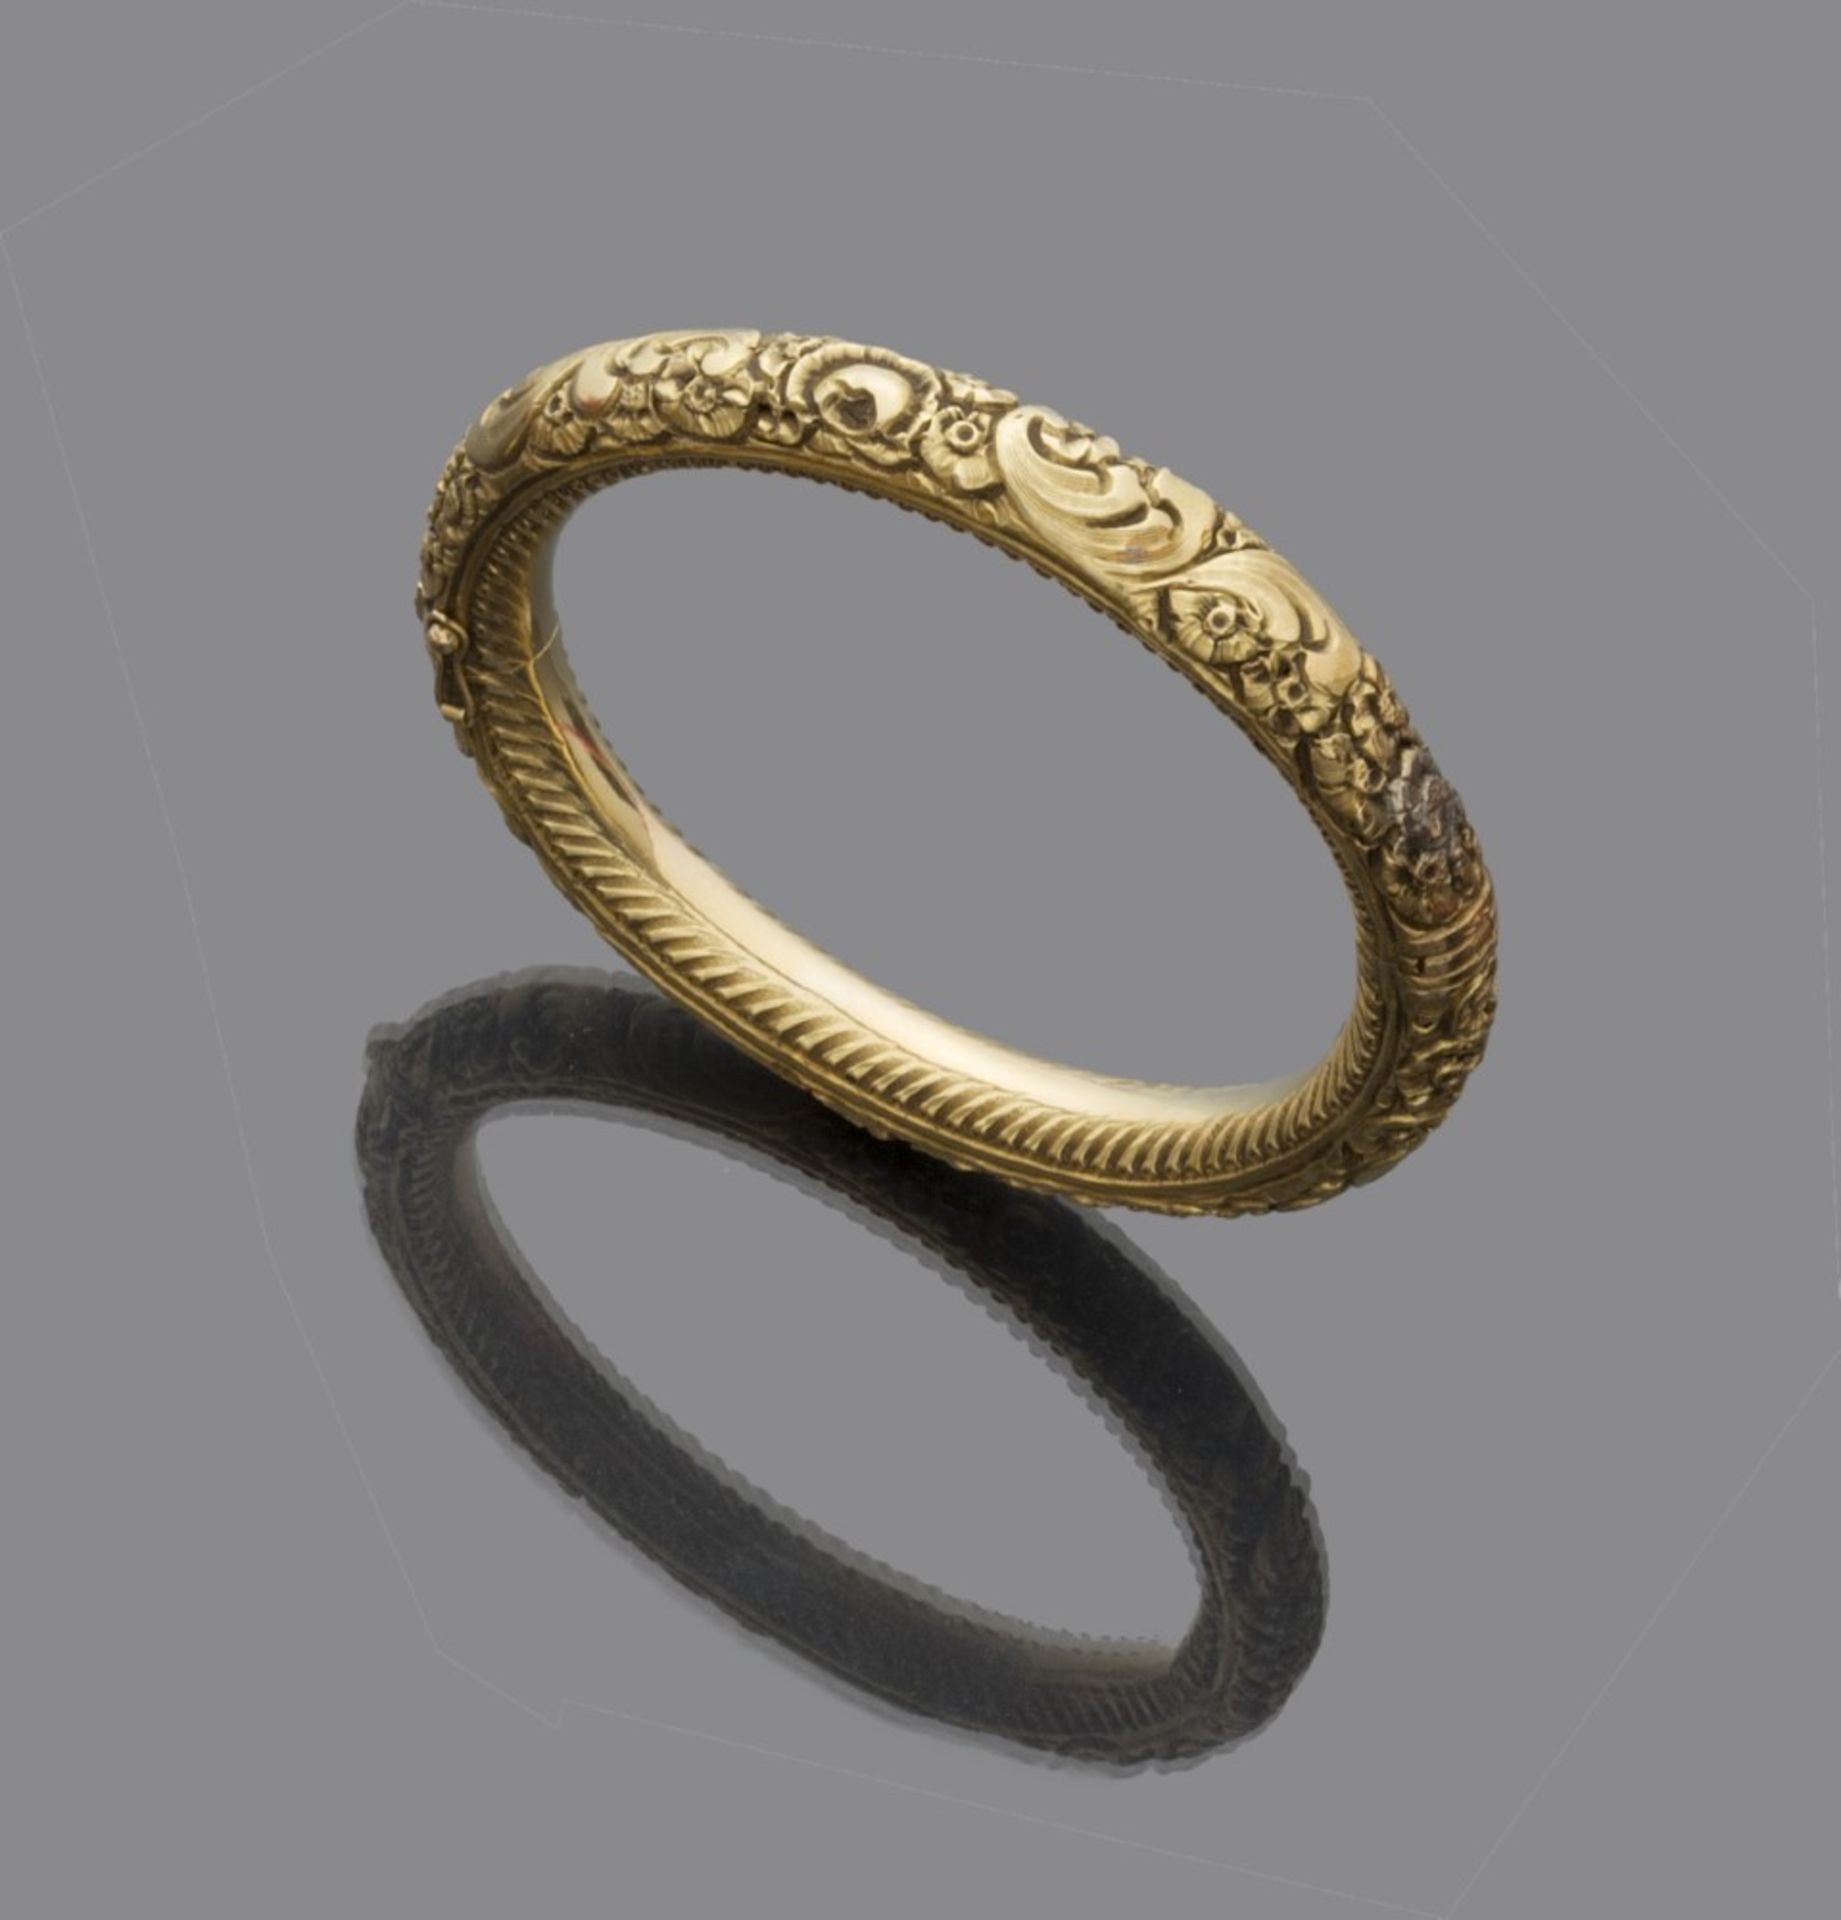 RIGID BRACELET entirely in 18 kt yellow gold, with a vegetable and floral pattern. Diameter cm. 7.5,